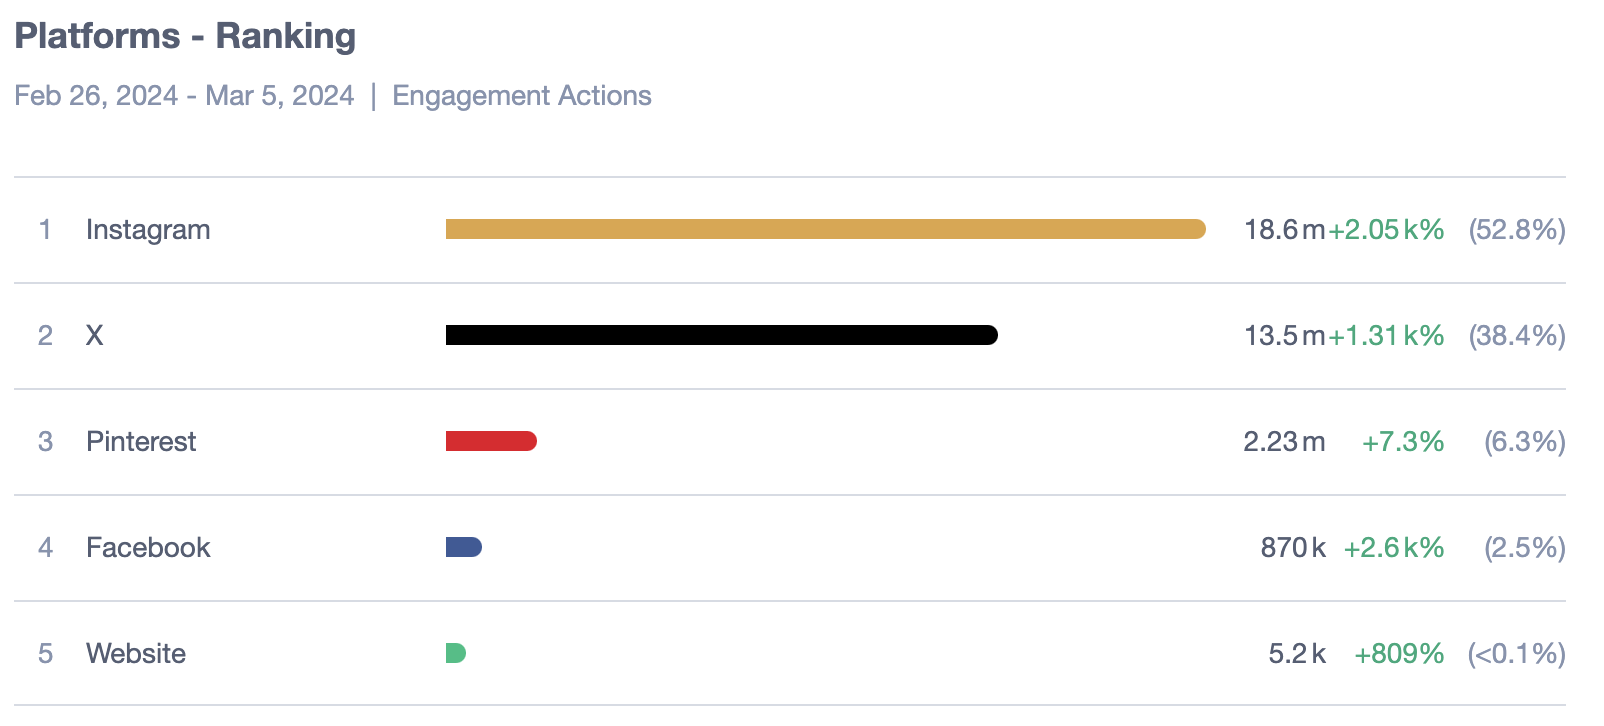 A bar chart list ranking platforms by the amount of engagement PFW content on them received from February 26 through March 5. 2024.